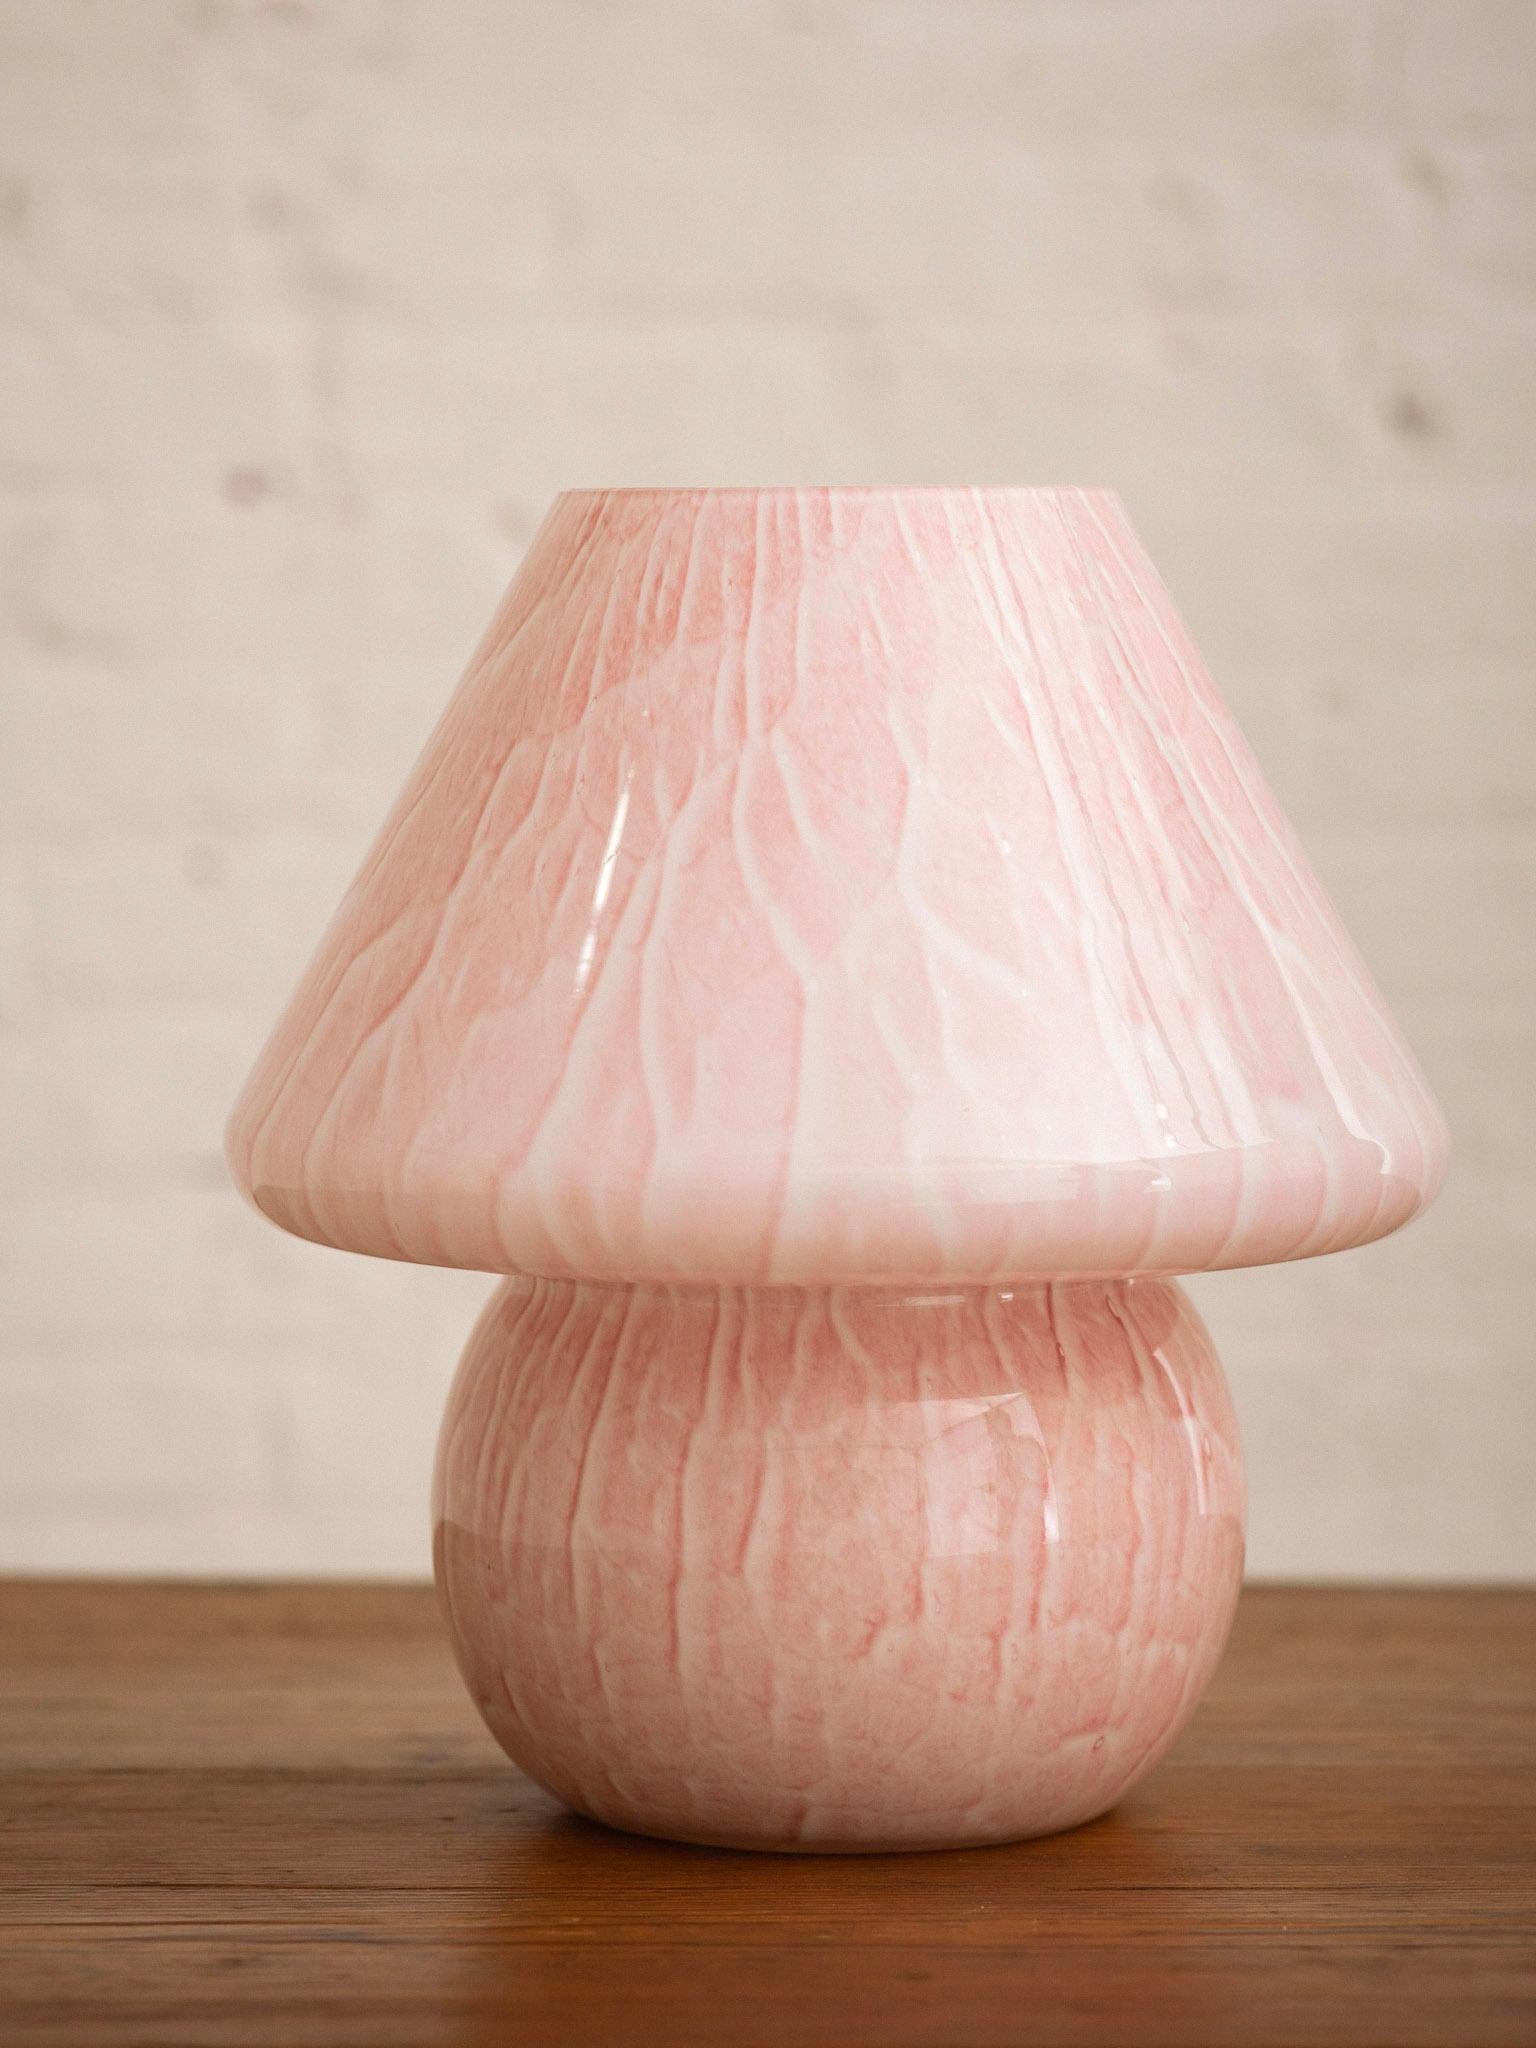 A mid century Murano glass mushroom lamp. Pale pink and cream marbleized glass. Updated wiring. Sourced in Italy.